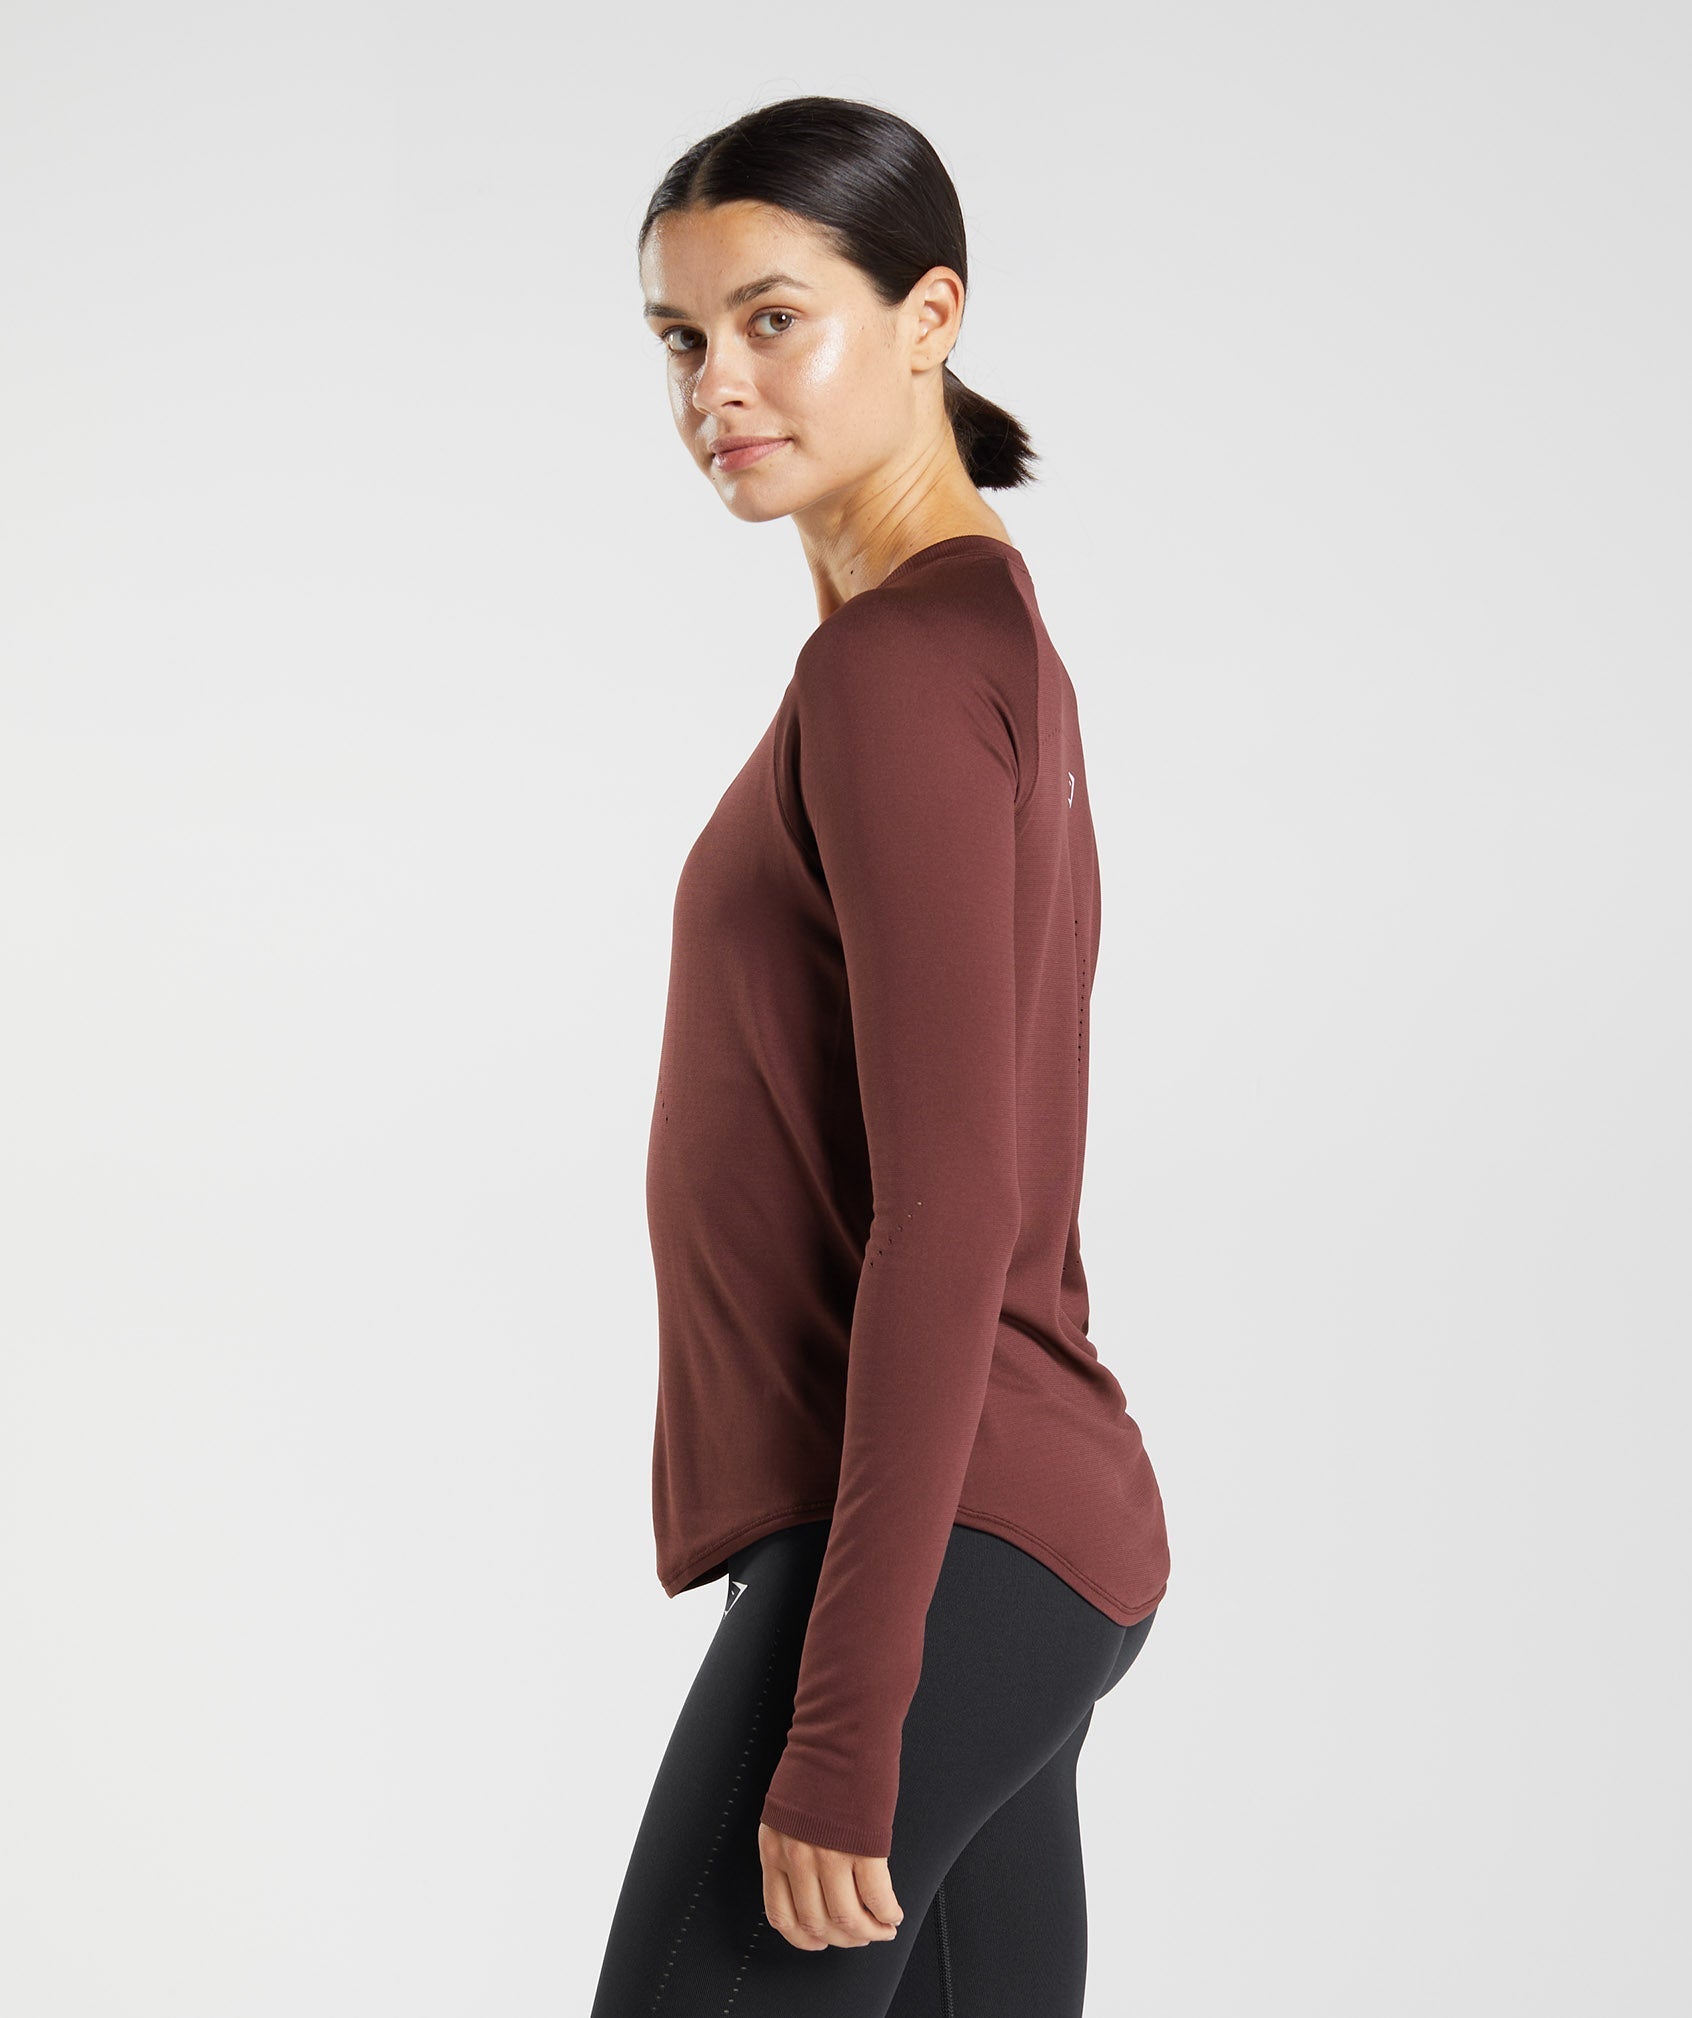 Sweat Seamless Long Sleeve Top in Baked Maroon - view 3